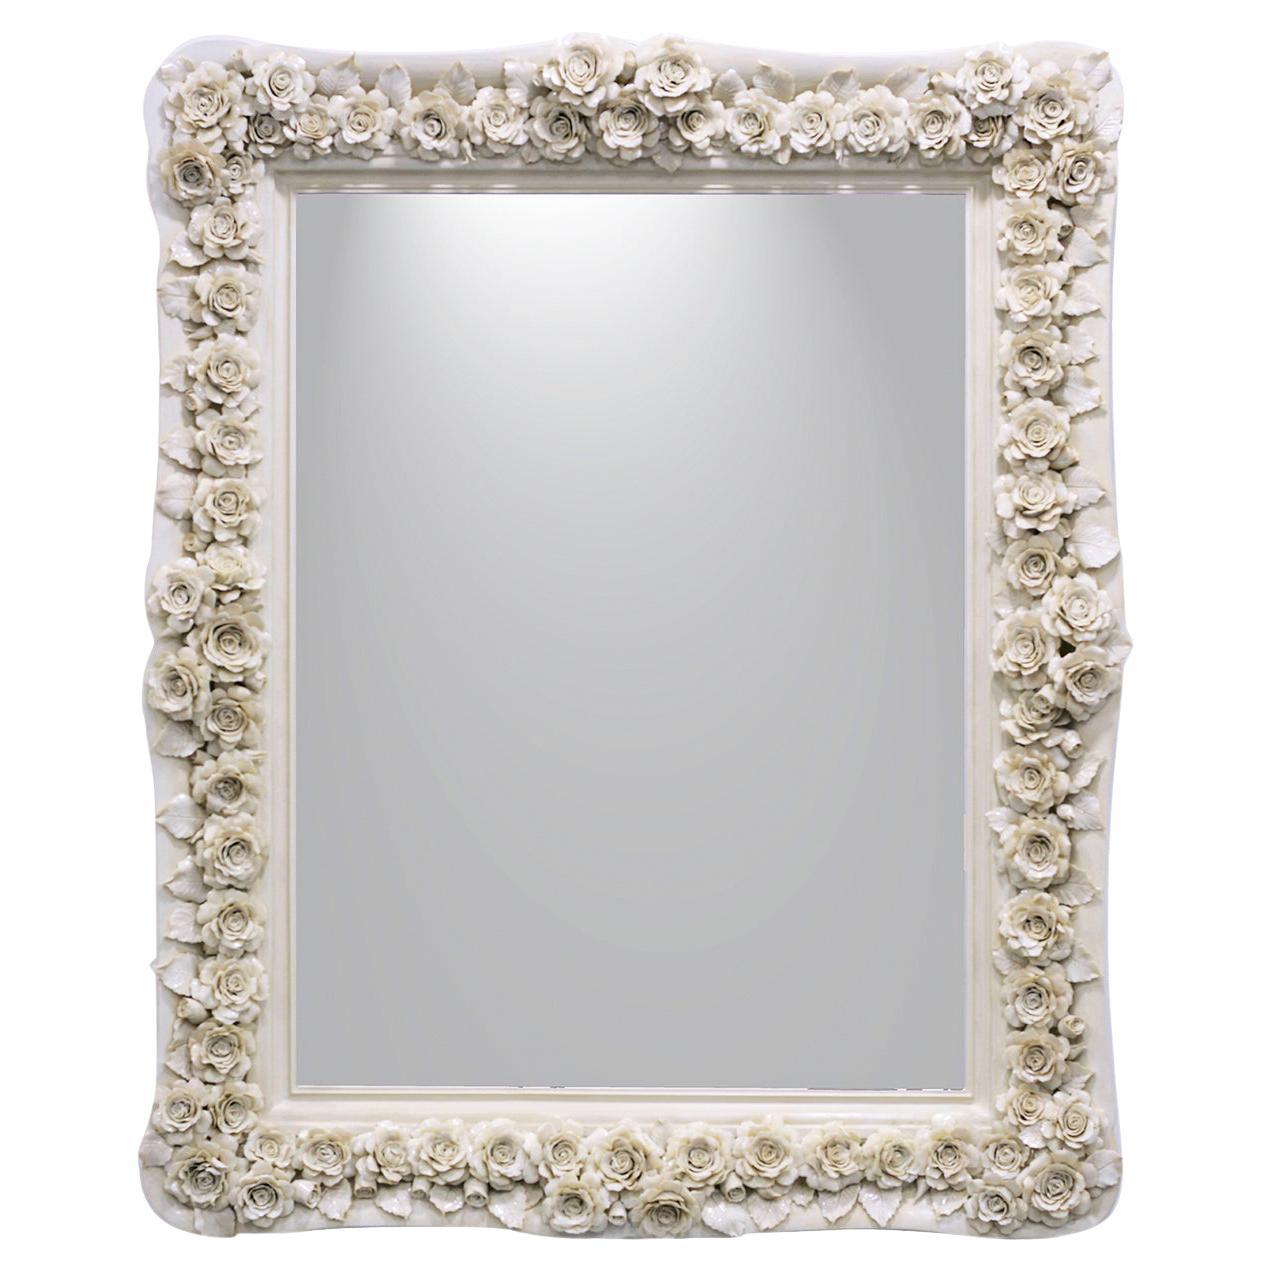 New Floral Rose Flowers White Bedroom Rectangle Dressing Table Top Wall Mirror 